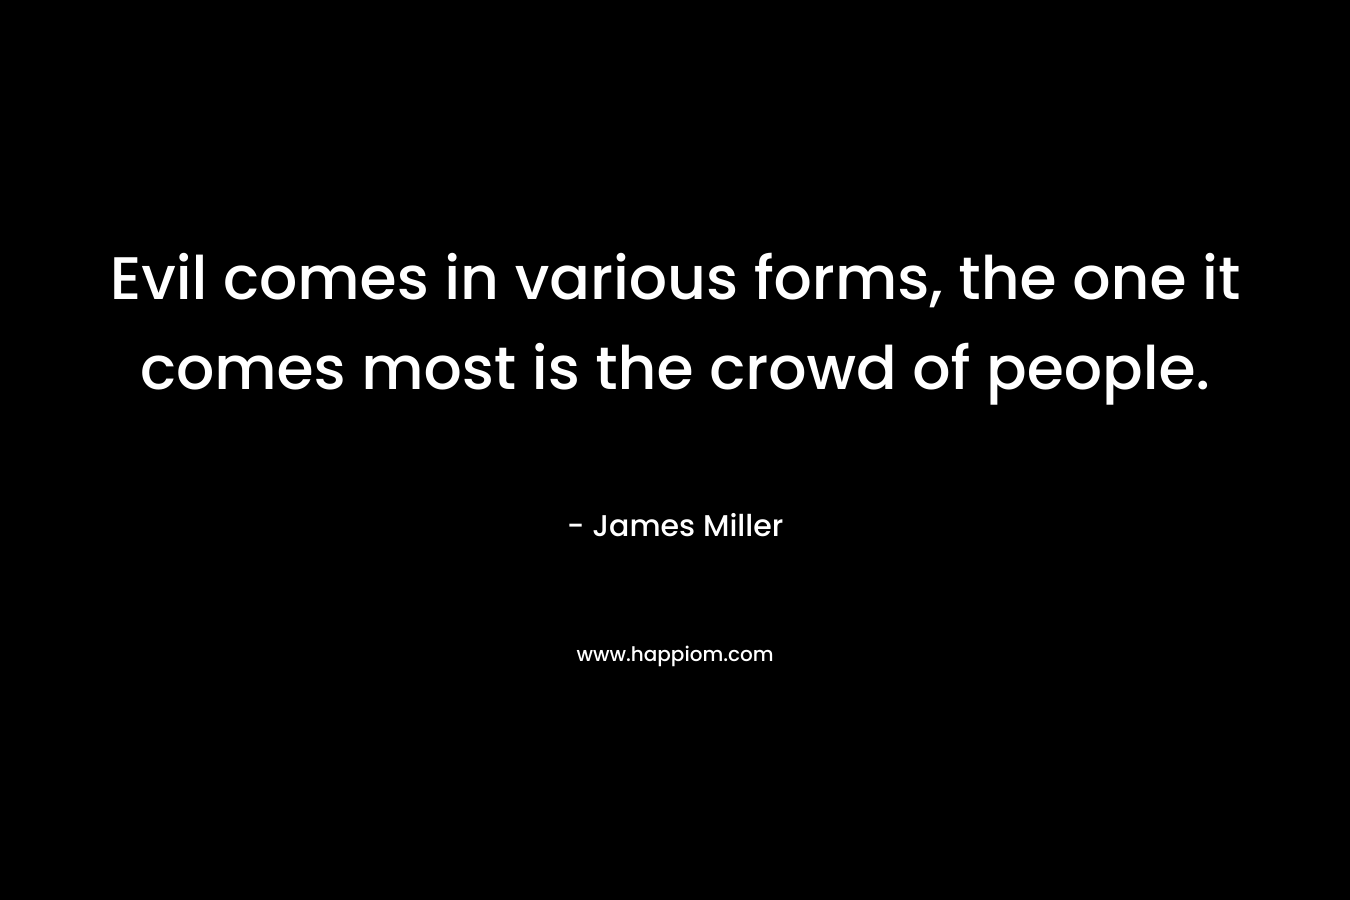 Evil comes in various forms, the one it comes most is the crowd of people.